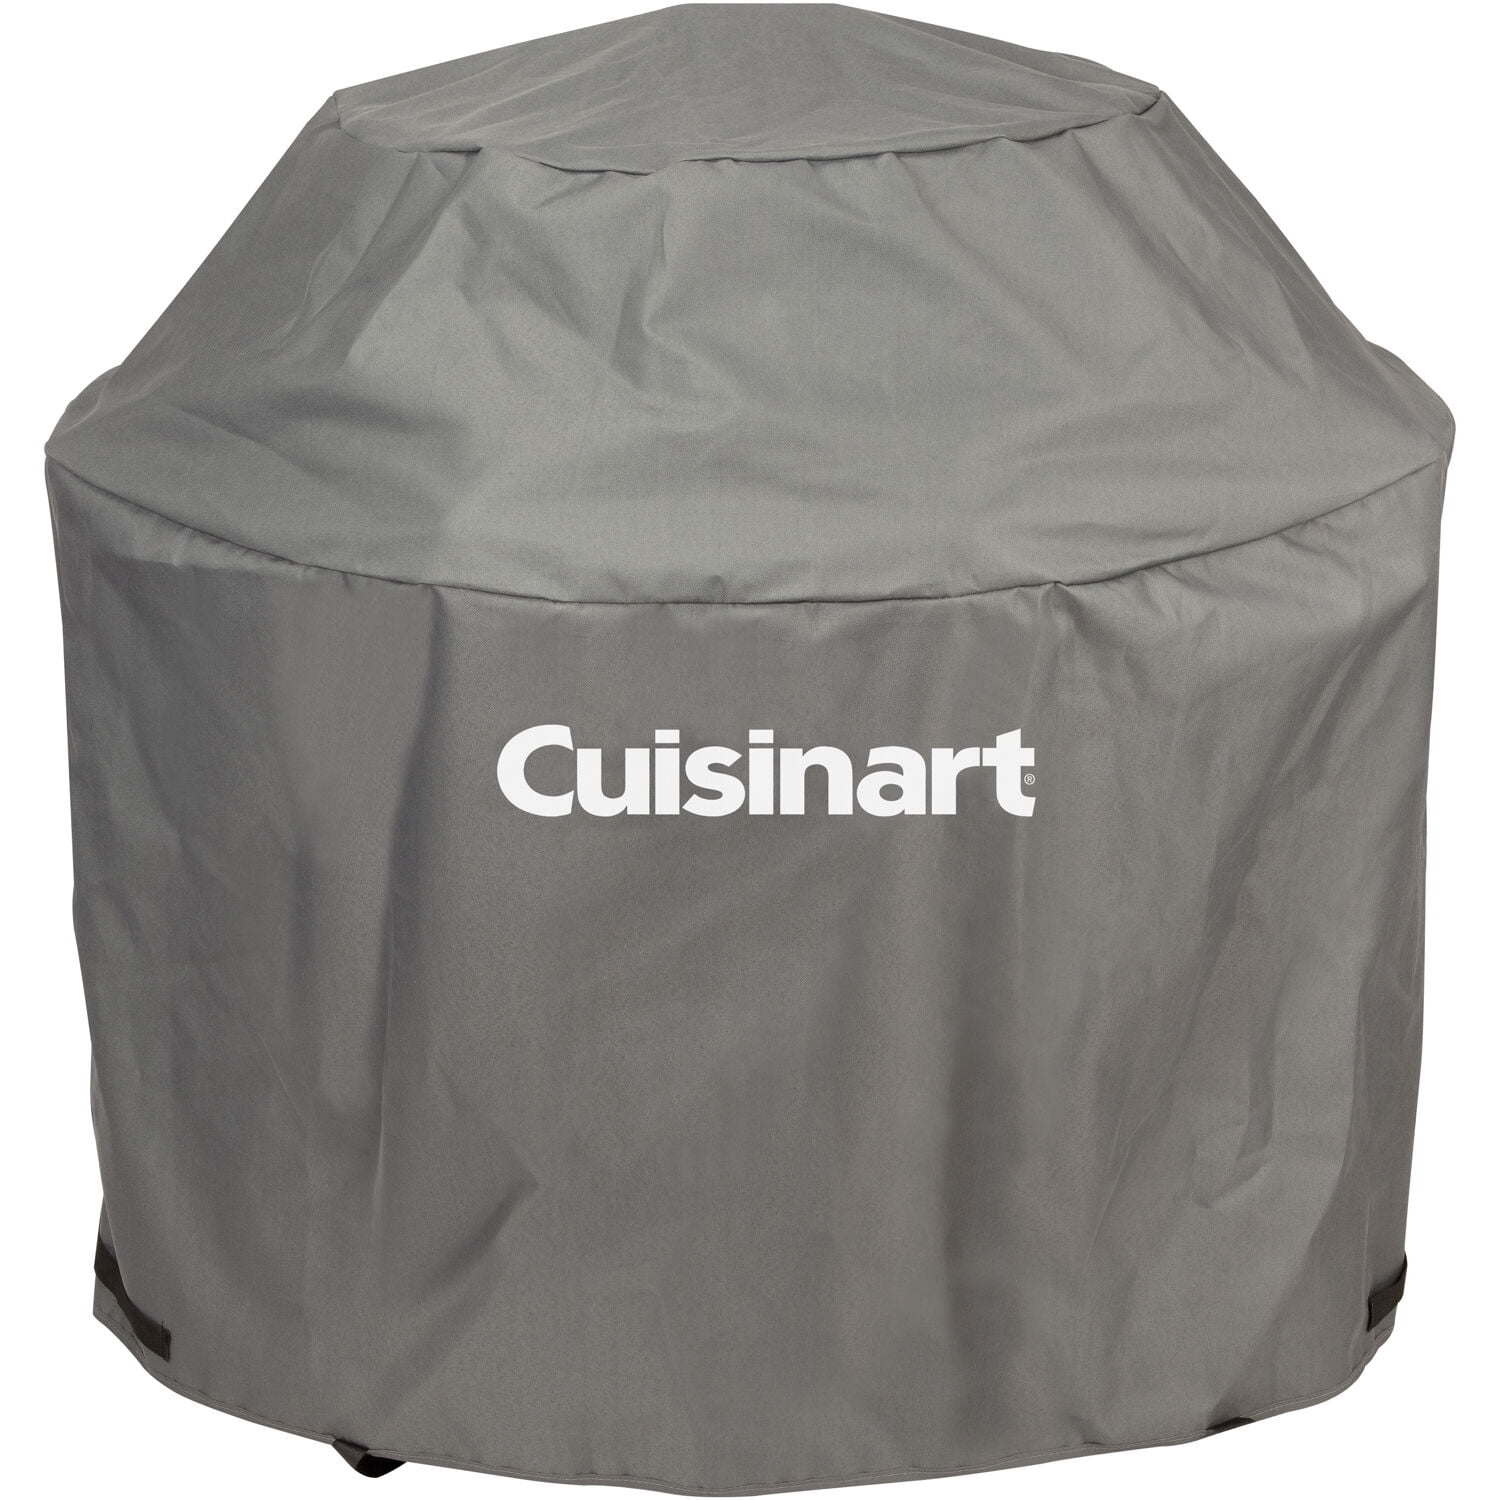   DURABLE CUISINART Griddle Cooking Center Cover 30" x 30" x 46" NEW 